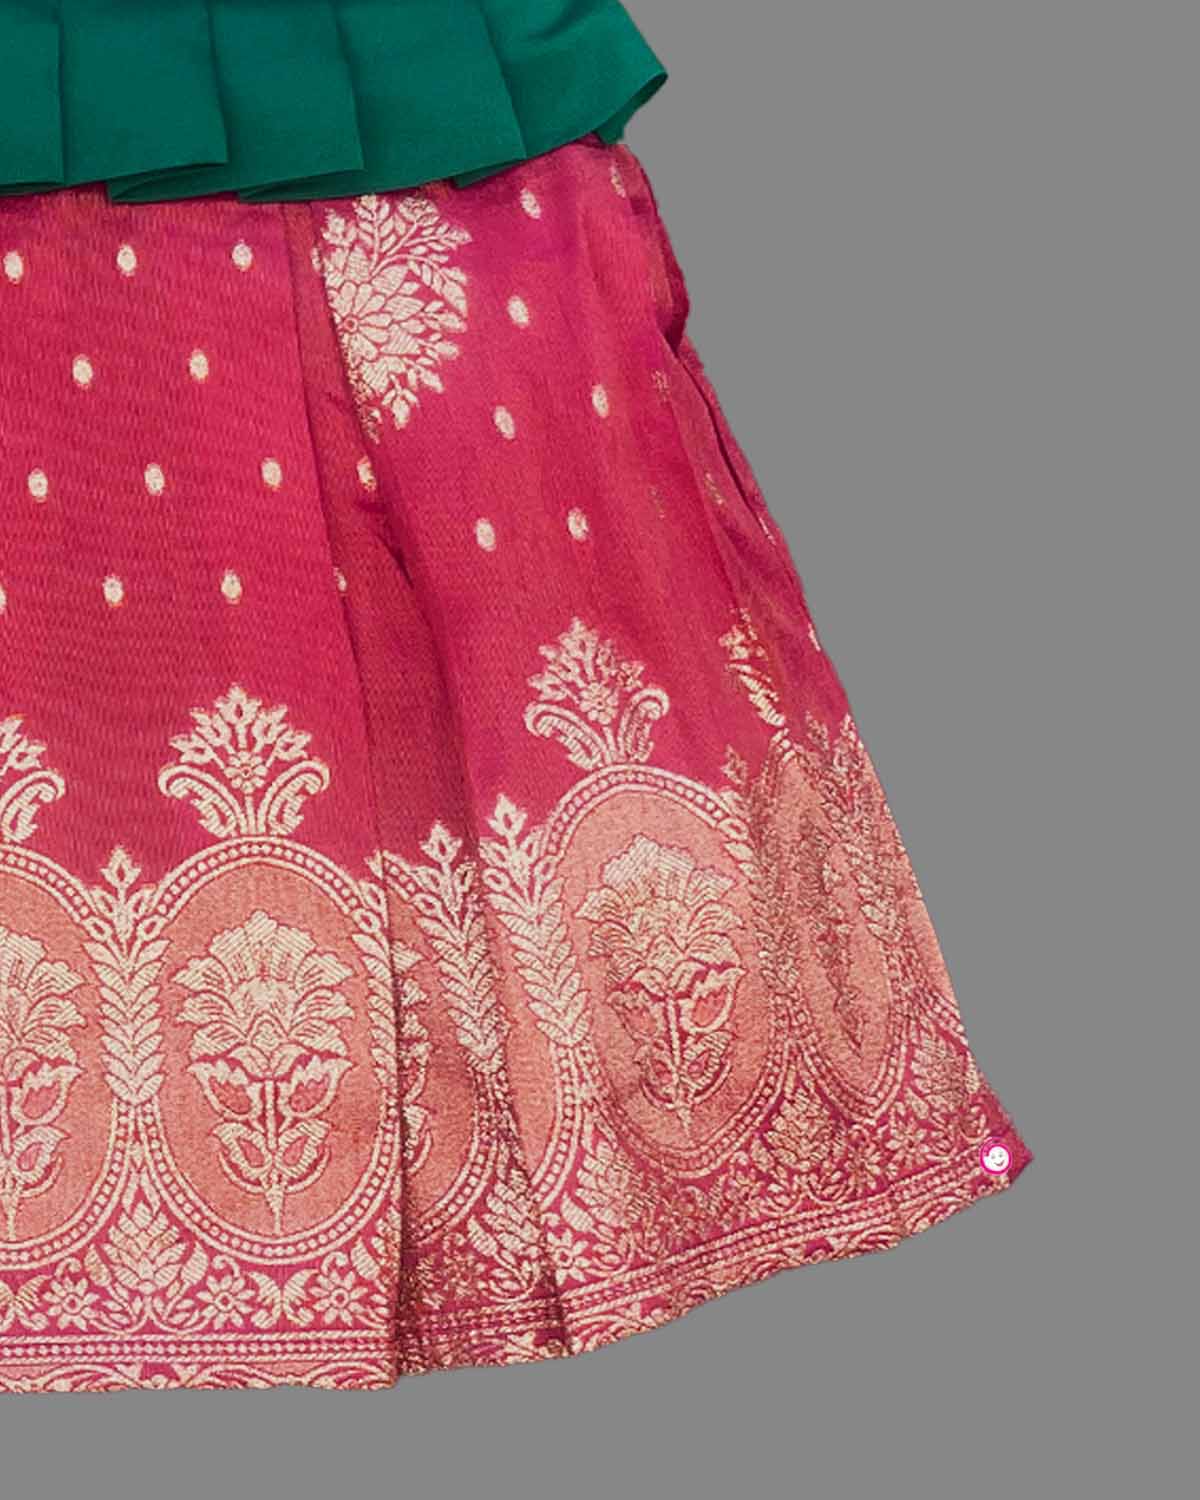 Girls embroidered traditional frock - Ramar Blue